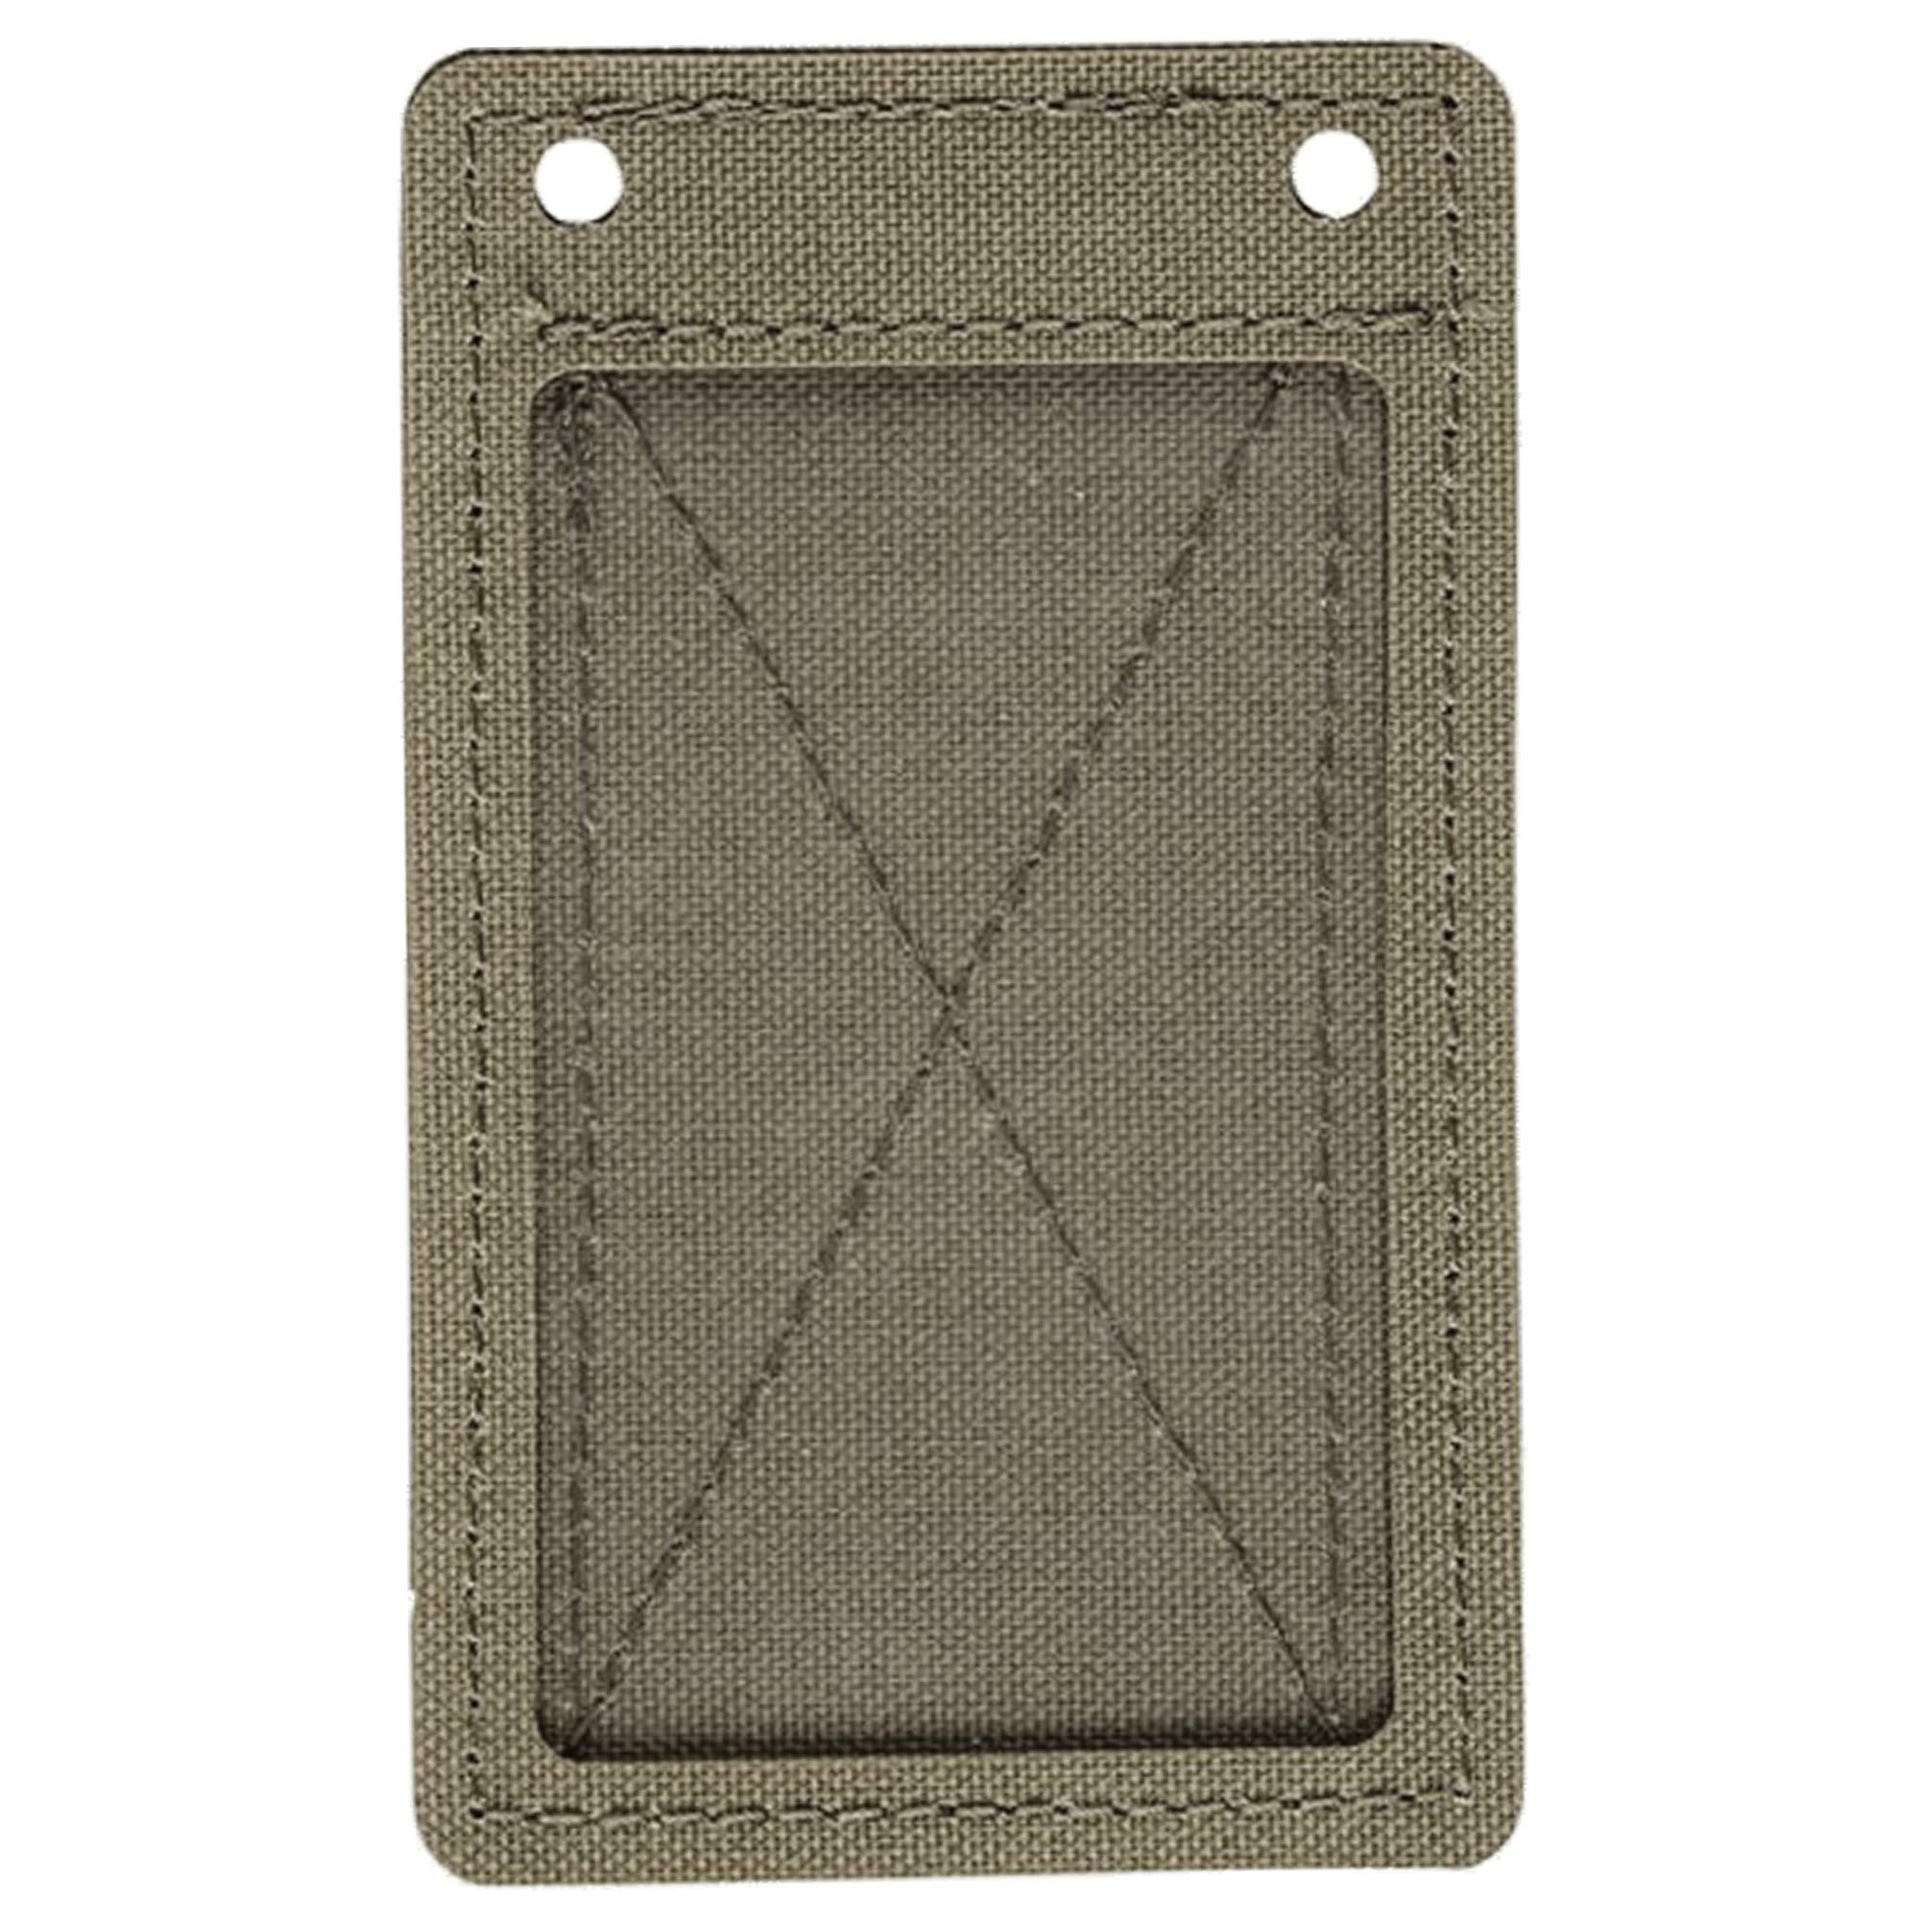 Service ID Pocket with Hook and Loop stone gray